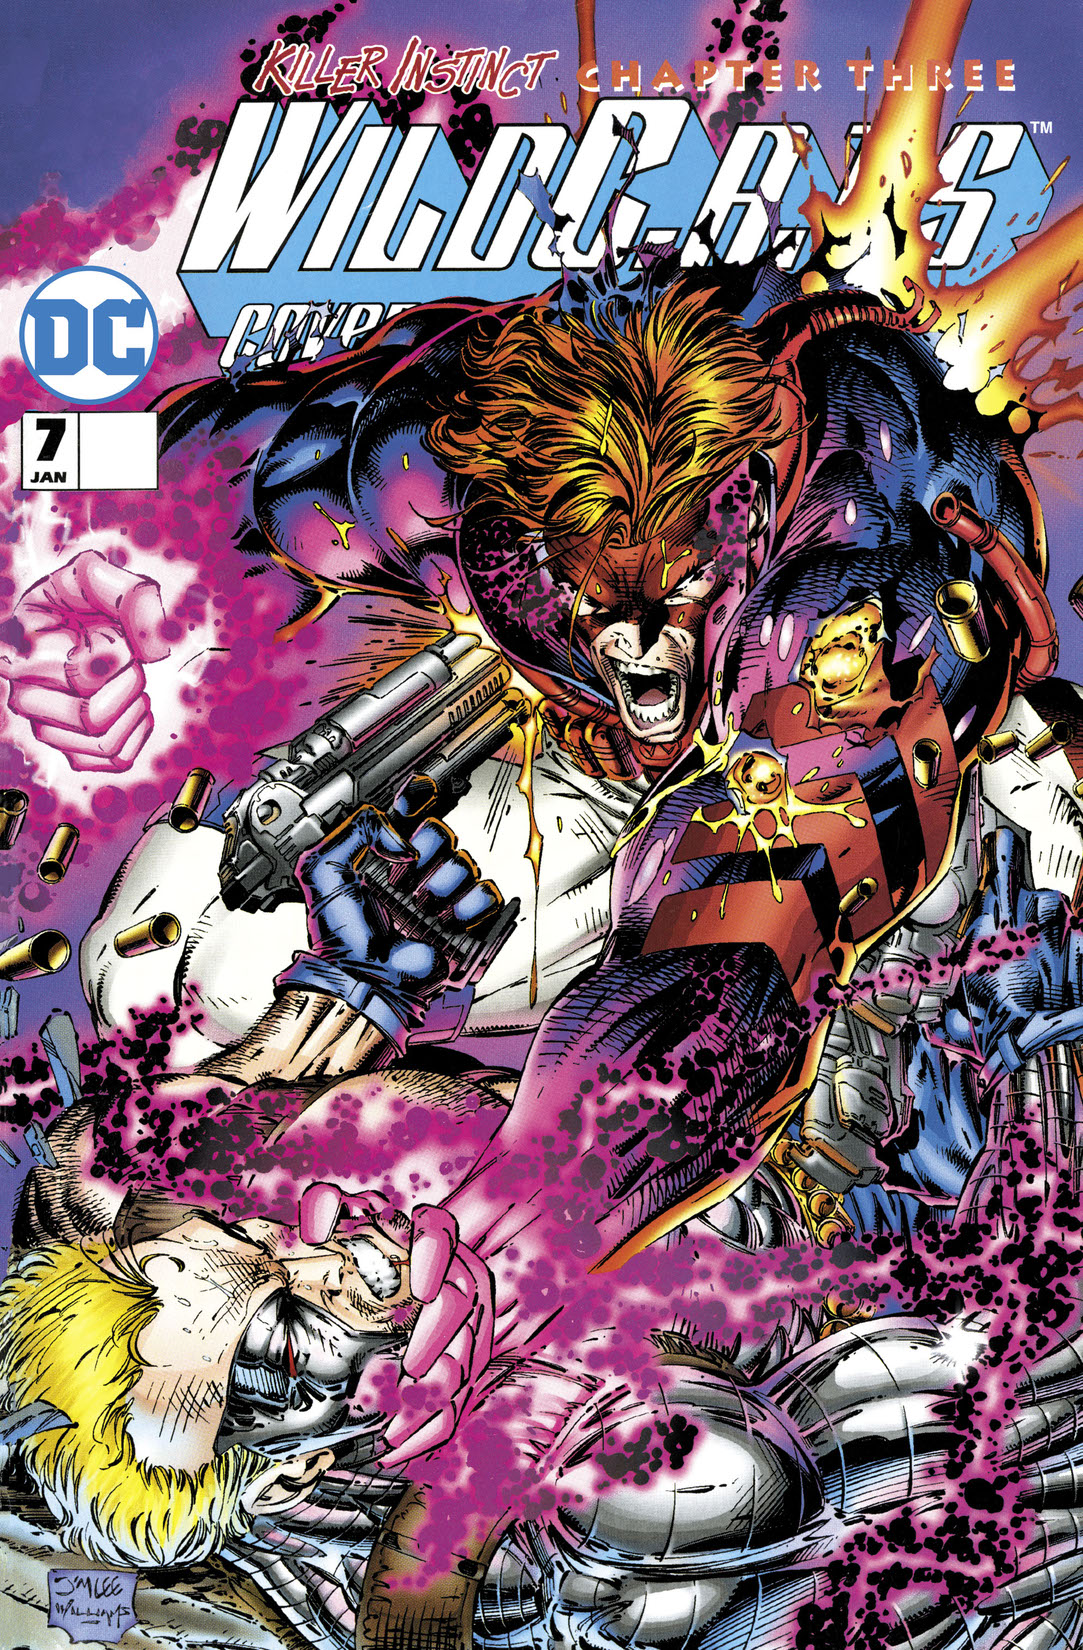 WildC.A.Ts: Covert Action Teams #7 preview images